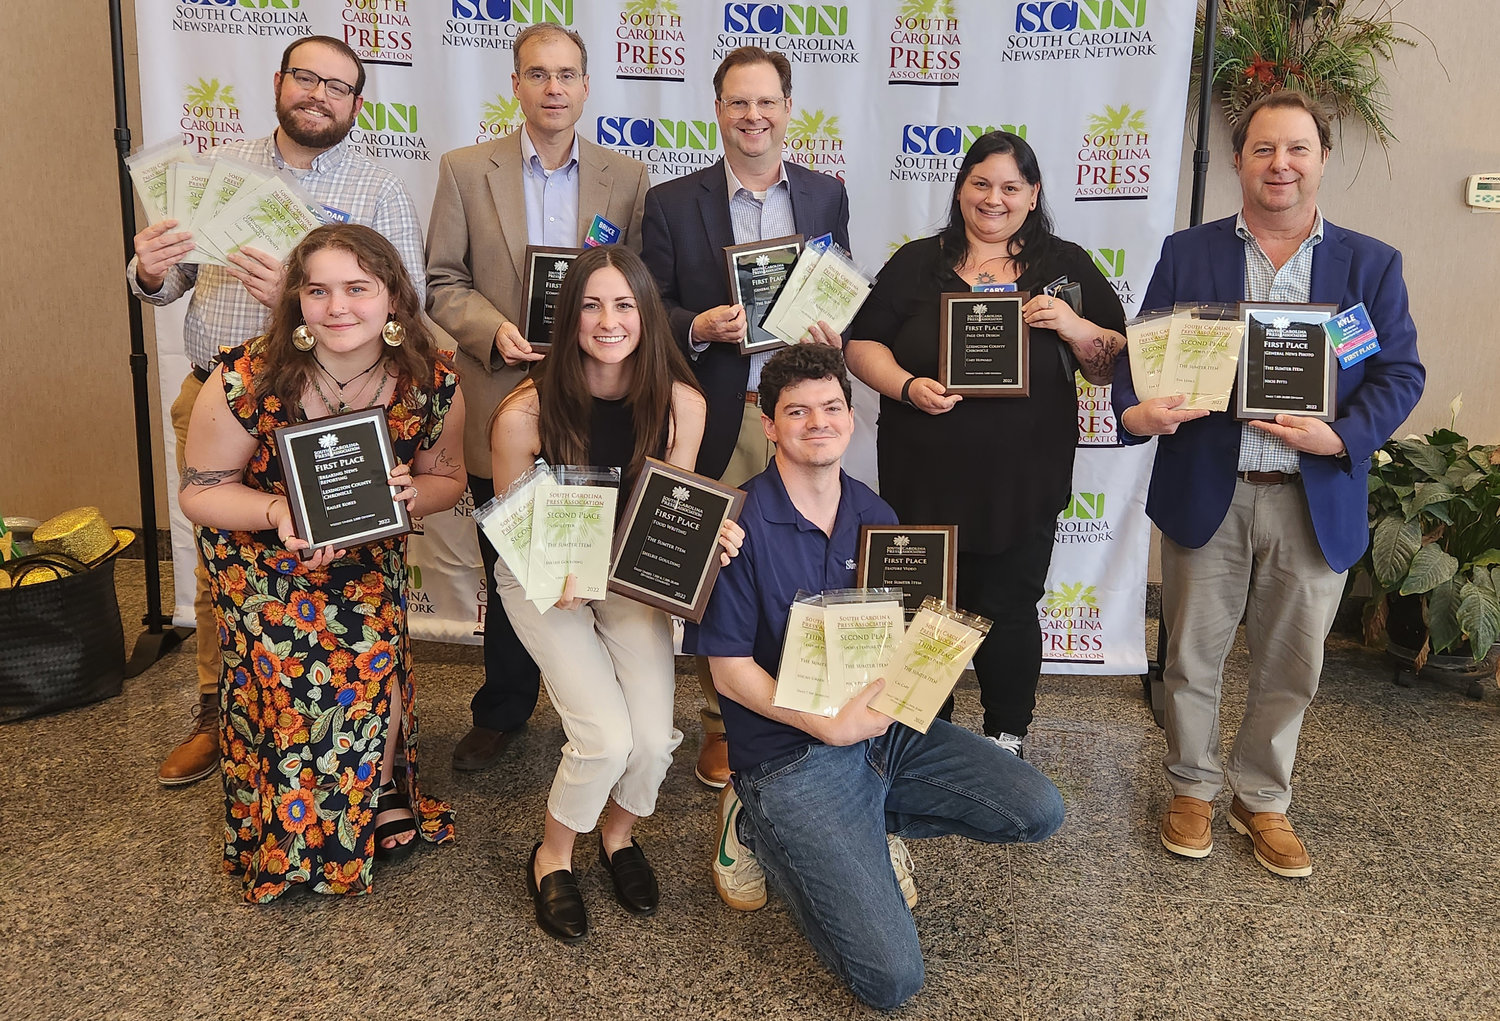 Staff members and owners of the Chronicle and sister paper The Sumter Item pose with awards won at the S.C. Press Association banquet on March 10.